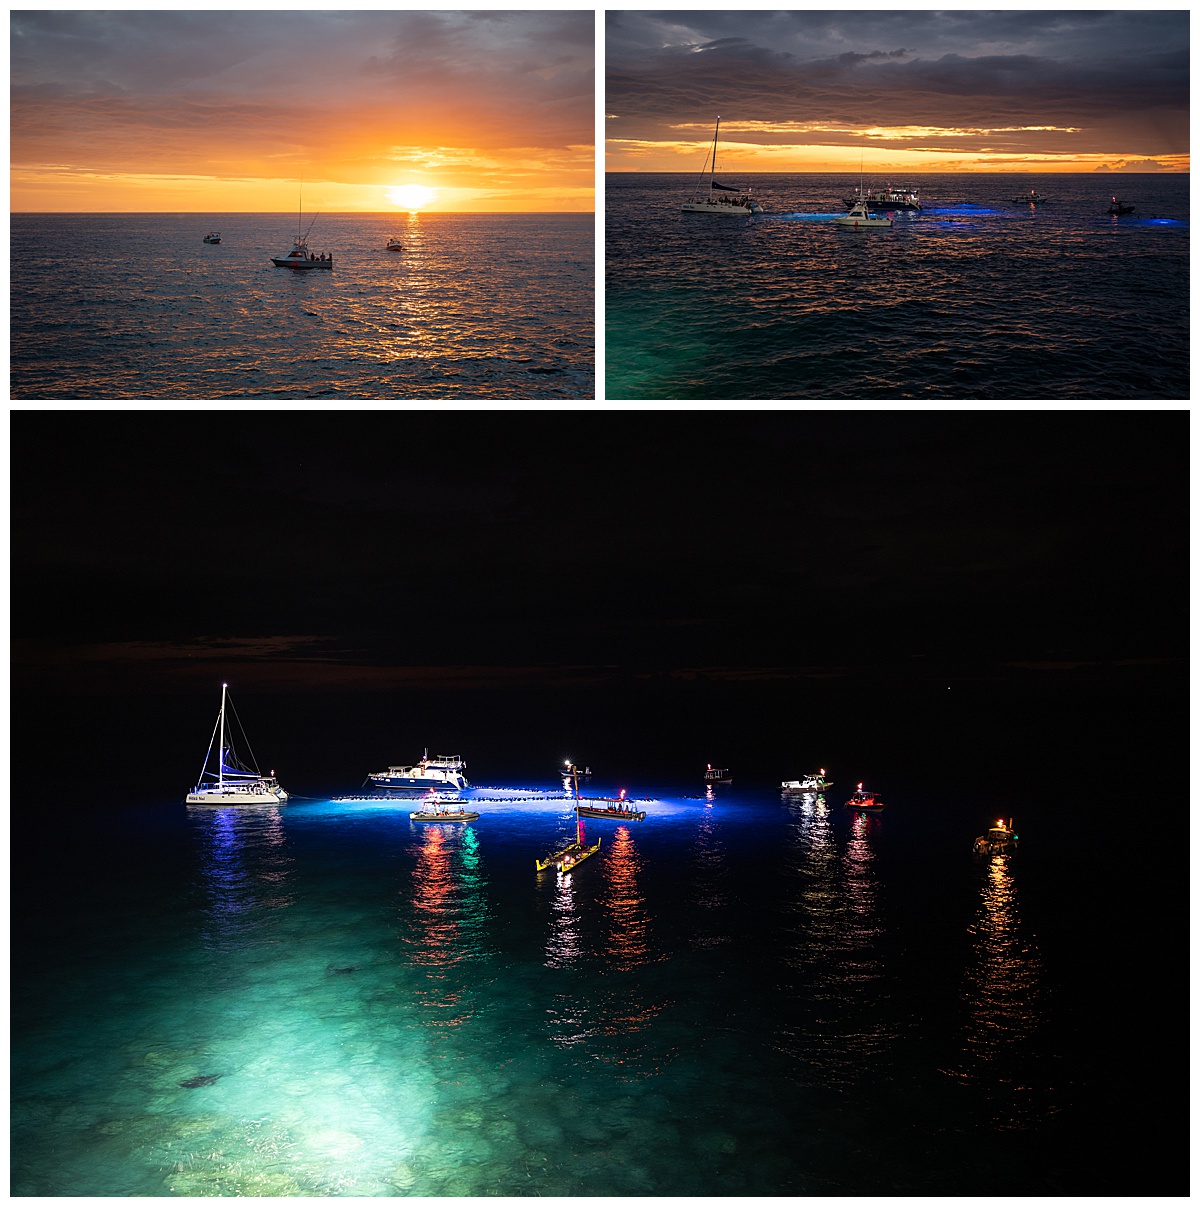 Sunset photos over the ocean. There are boats on the water for the manta ray viewings. The water is dark and there are lights in the water to see the manta rays.